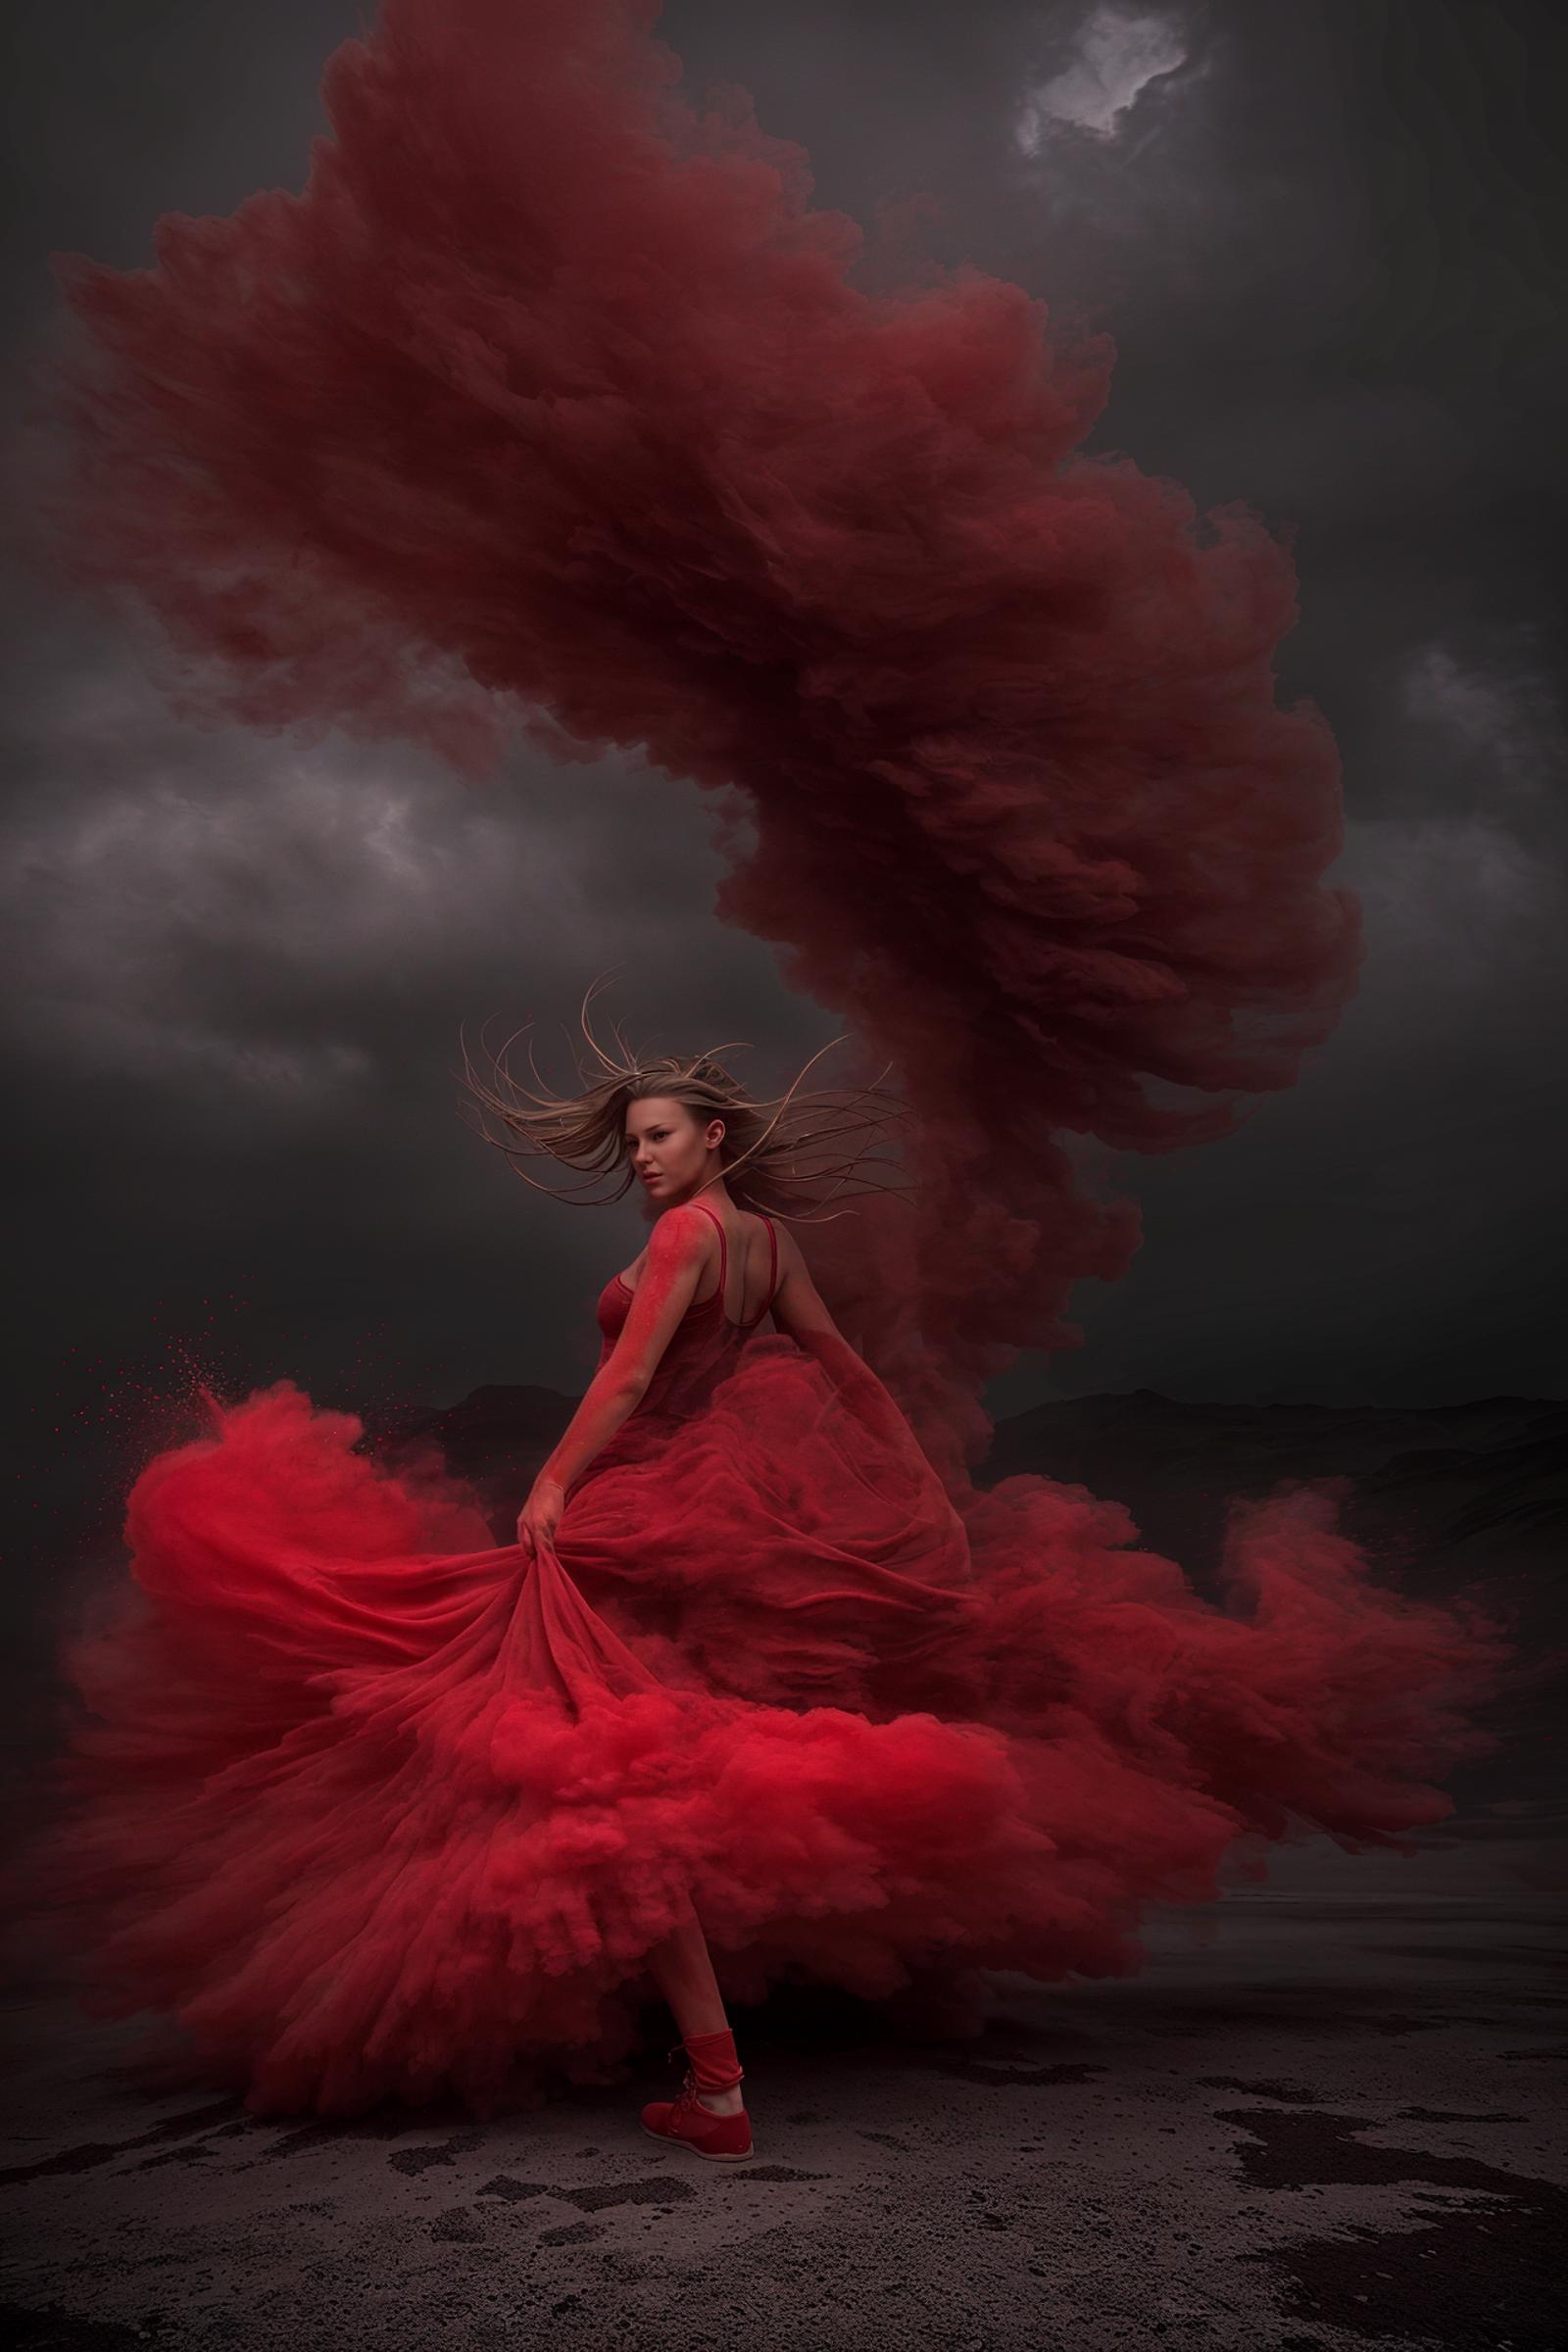 A woman in a flowing red dress surrounded by red smoke or fog.